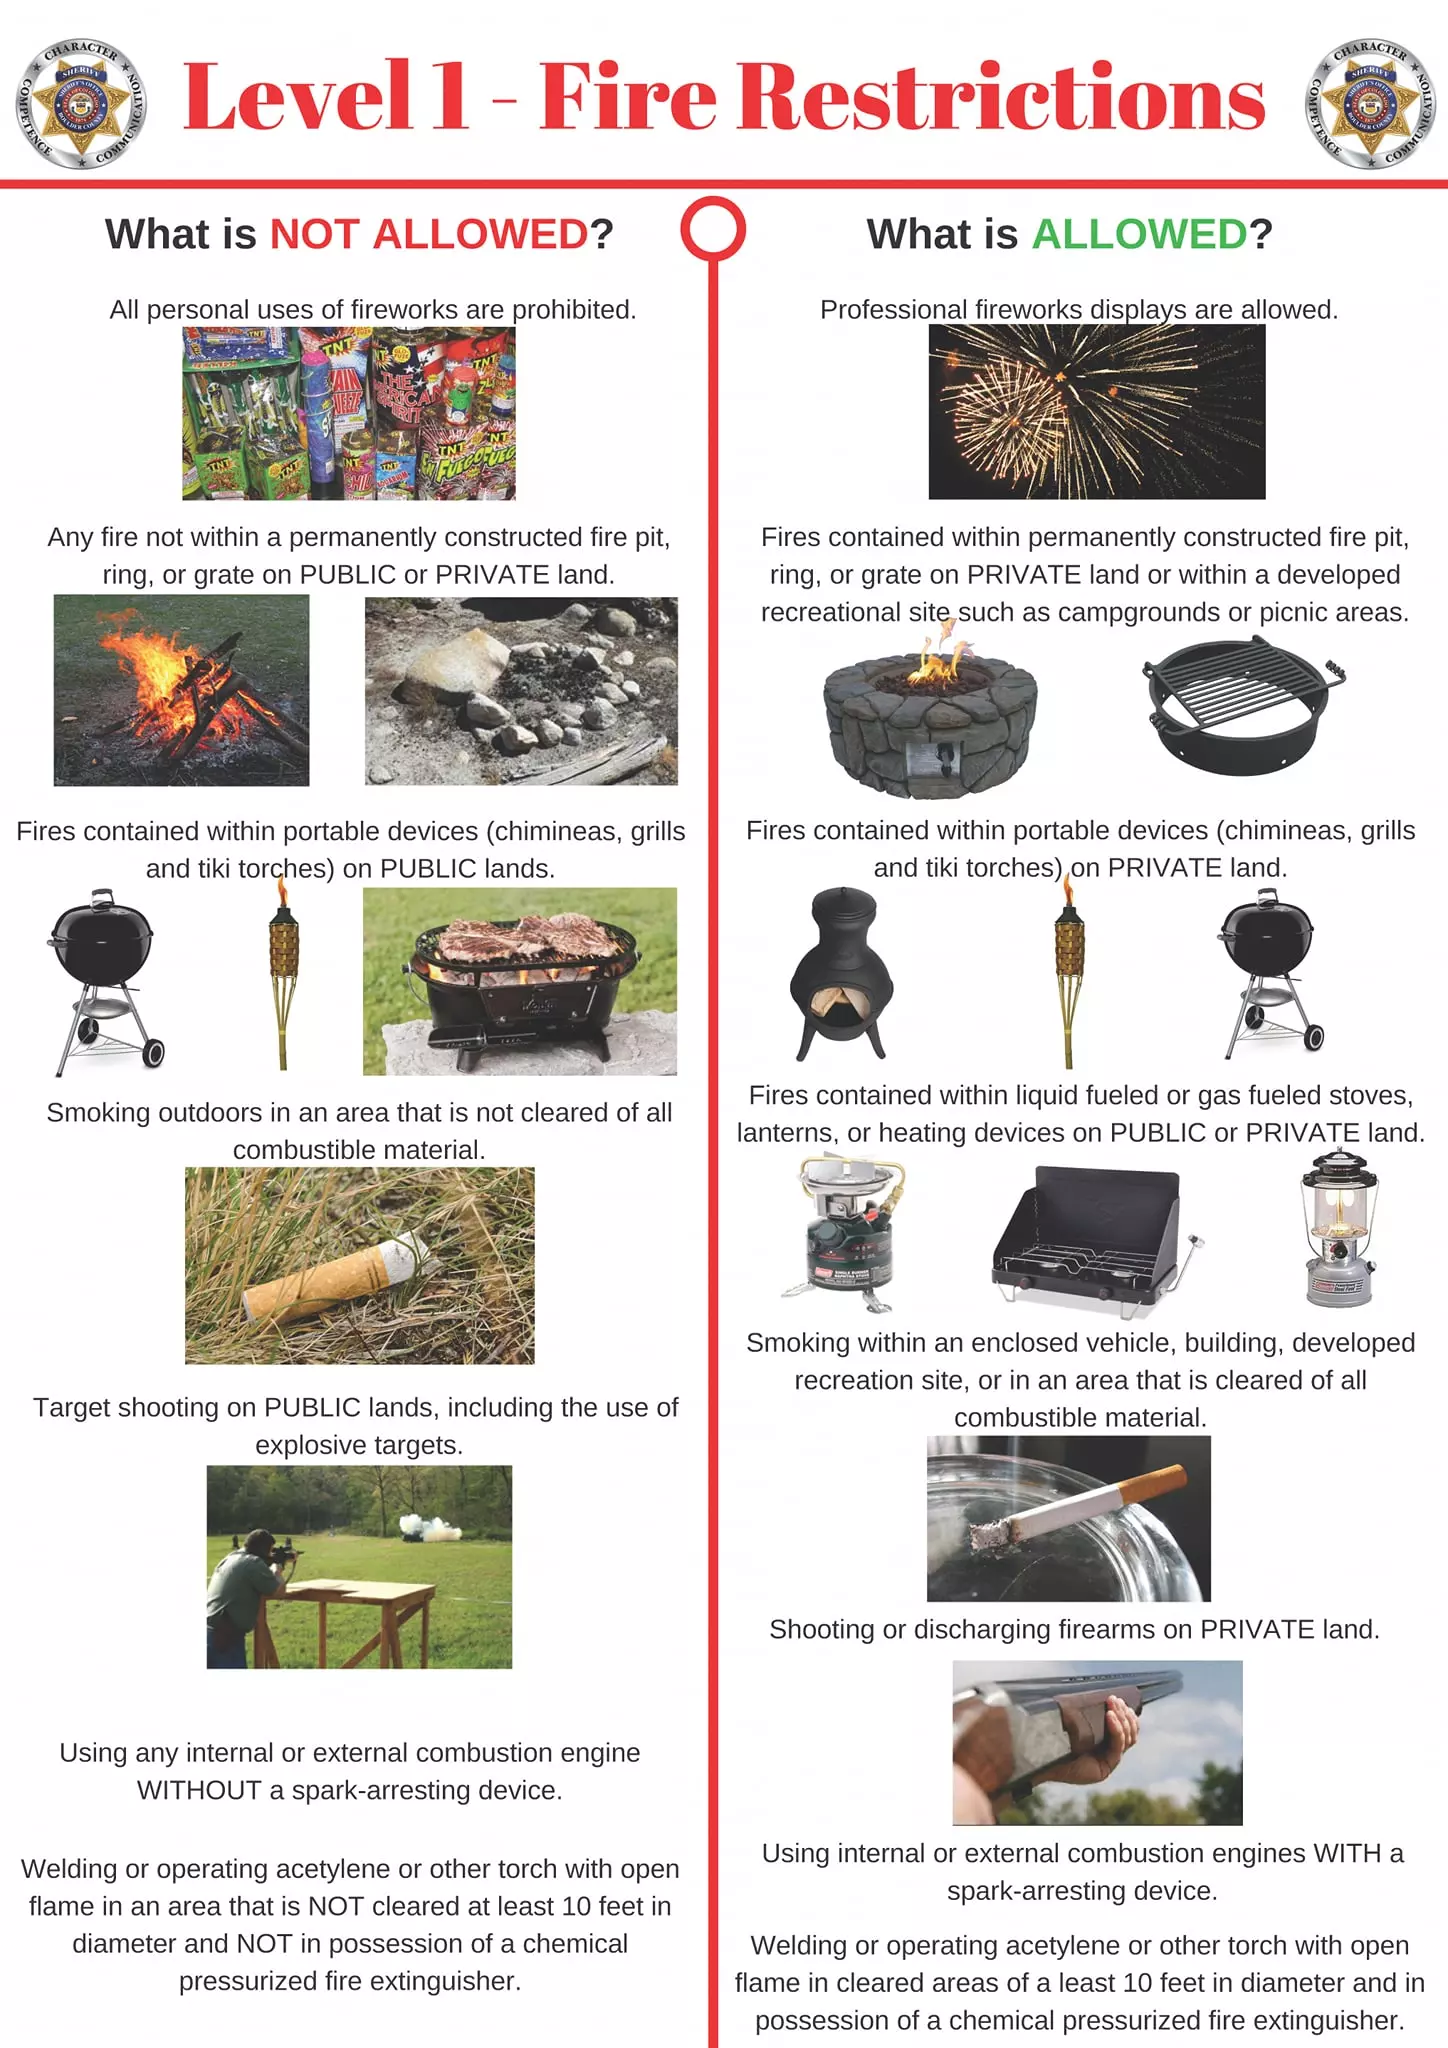 A list of Level 1 Fire Restrictions. Not Allowed - Personal Fireworks, fires on Public or Private land not in a permanently constructed fire pit, smoking outdoors in uncleared areas, target shooting in public land.